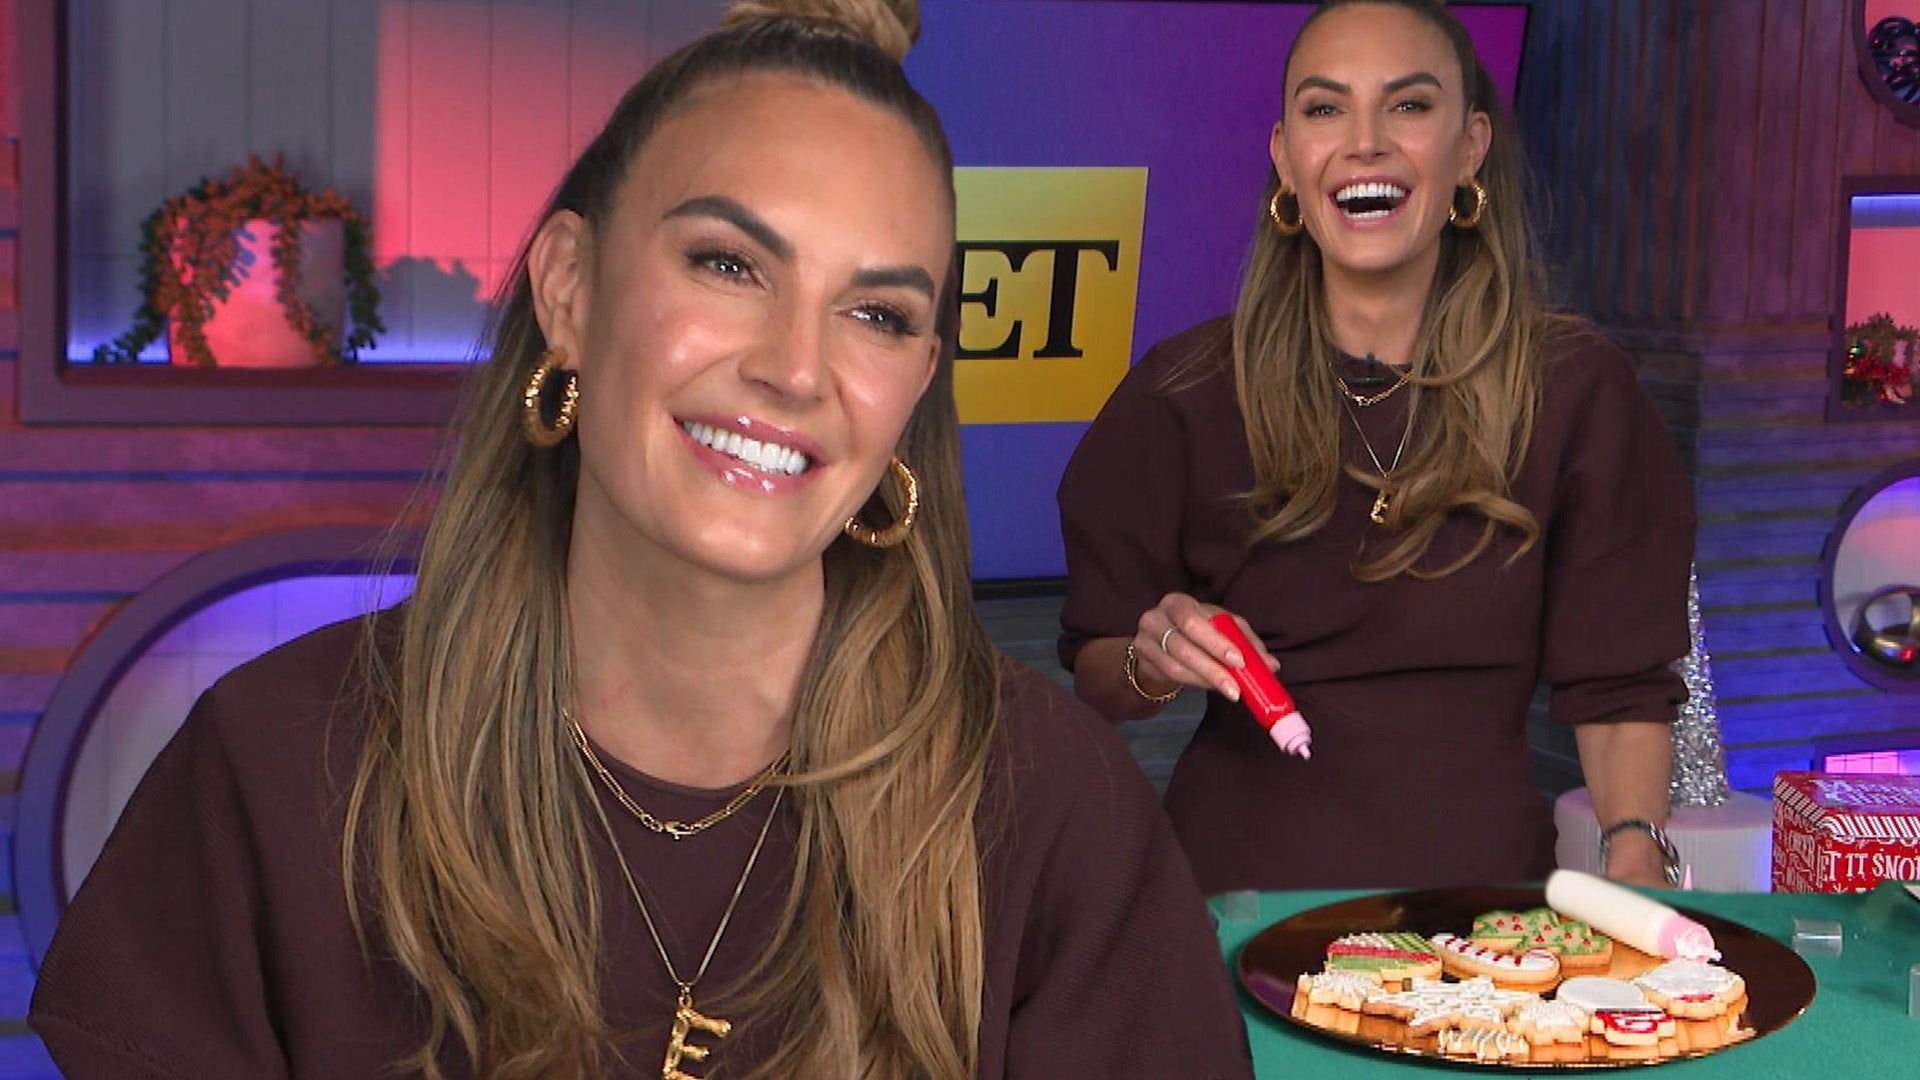 Elizabeth Chambers Reveals Goals for 2023 and the 'Secret' Behind Family’s Sugar Cookies (Exclusive)